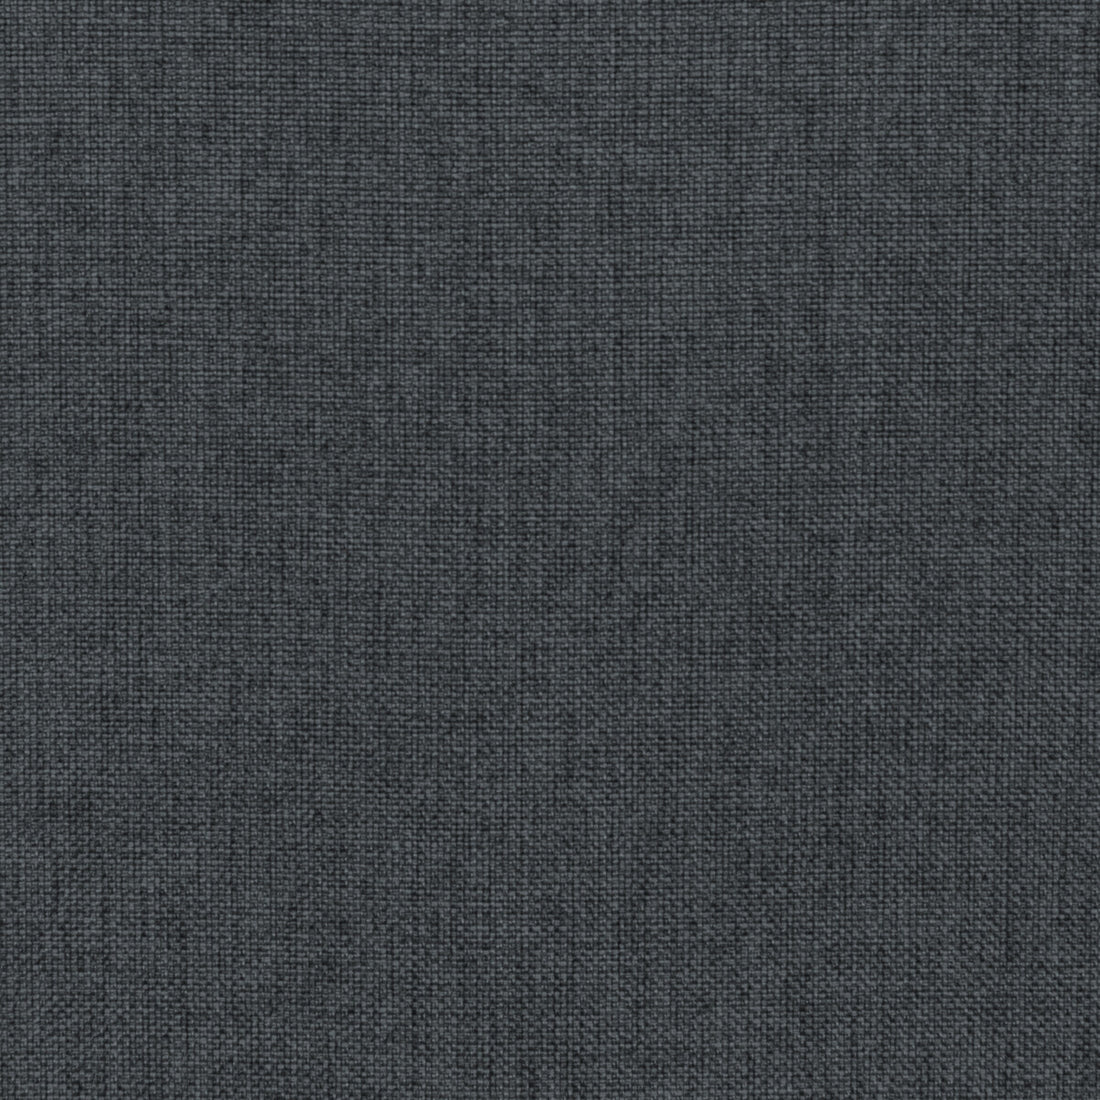 Fortify fabric in graphite color - pattern 36257.2121.0 - by Kravet Contract in the Supreen collection